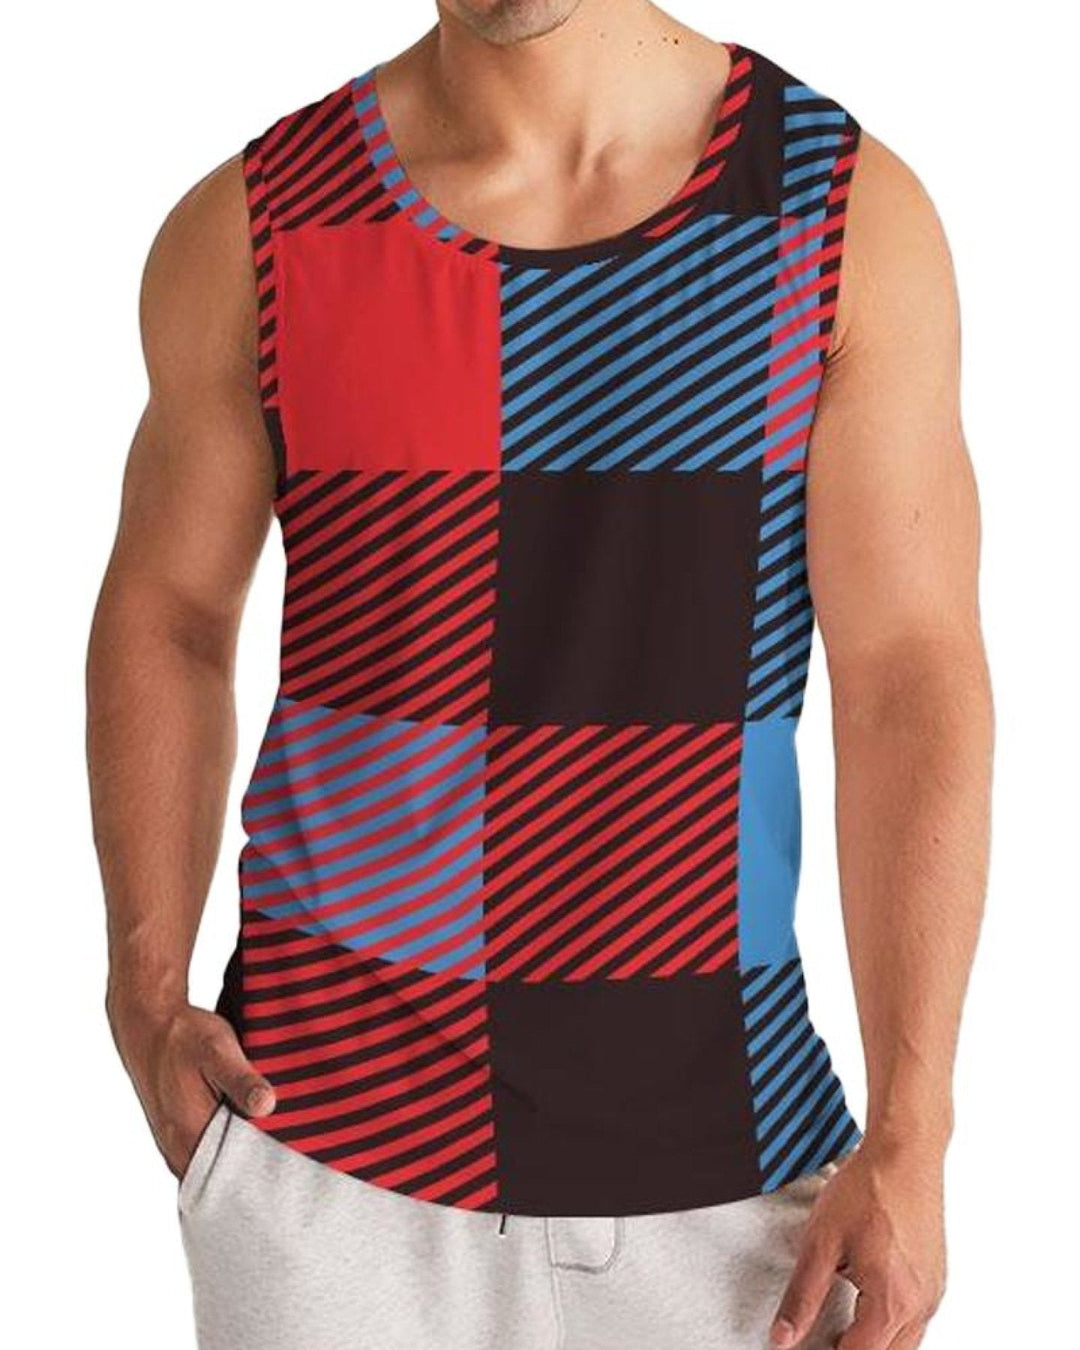 Mens Tank top, Multicolor Flannel Pattern Sports Top-3